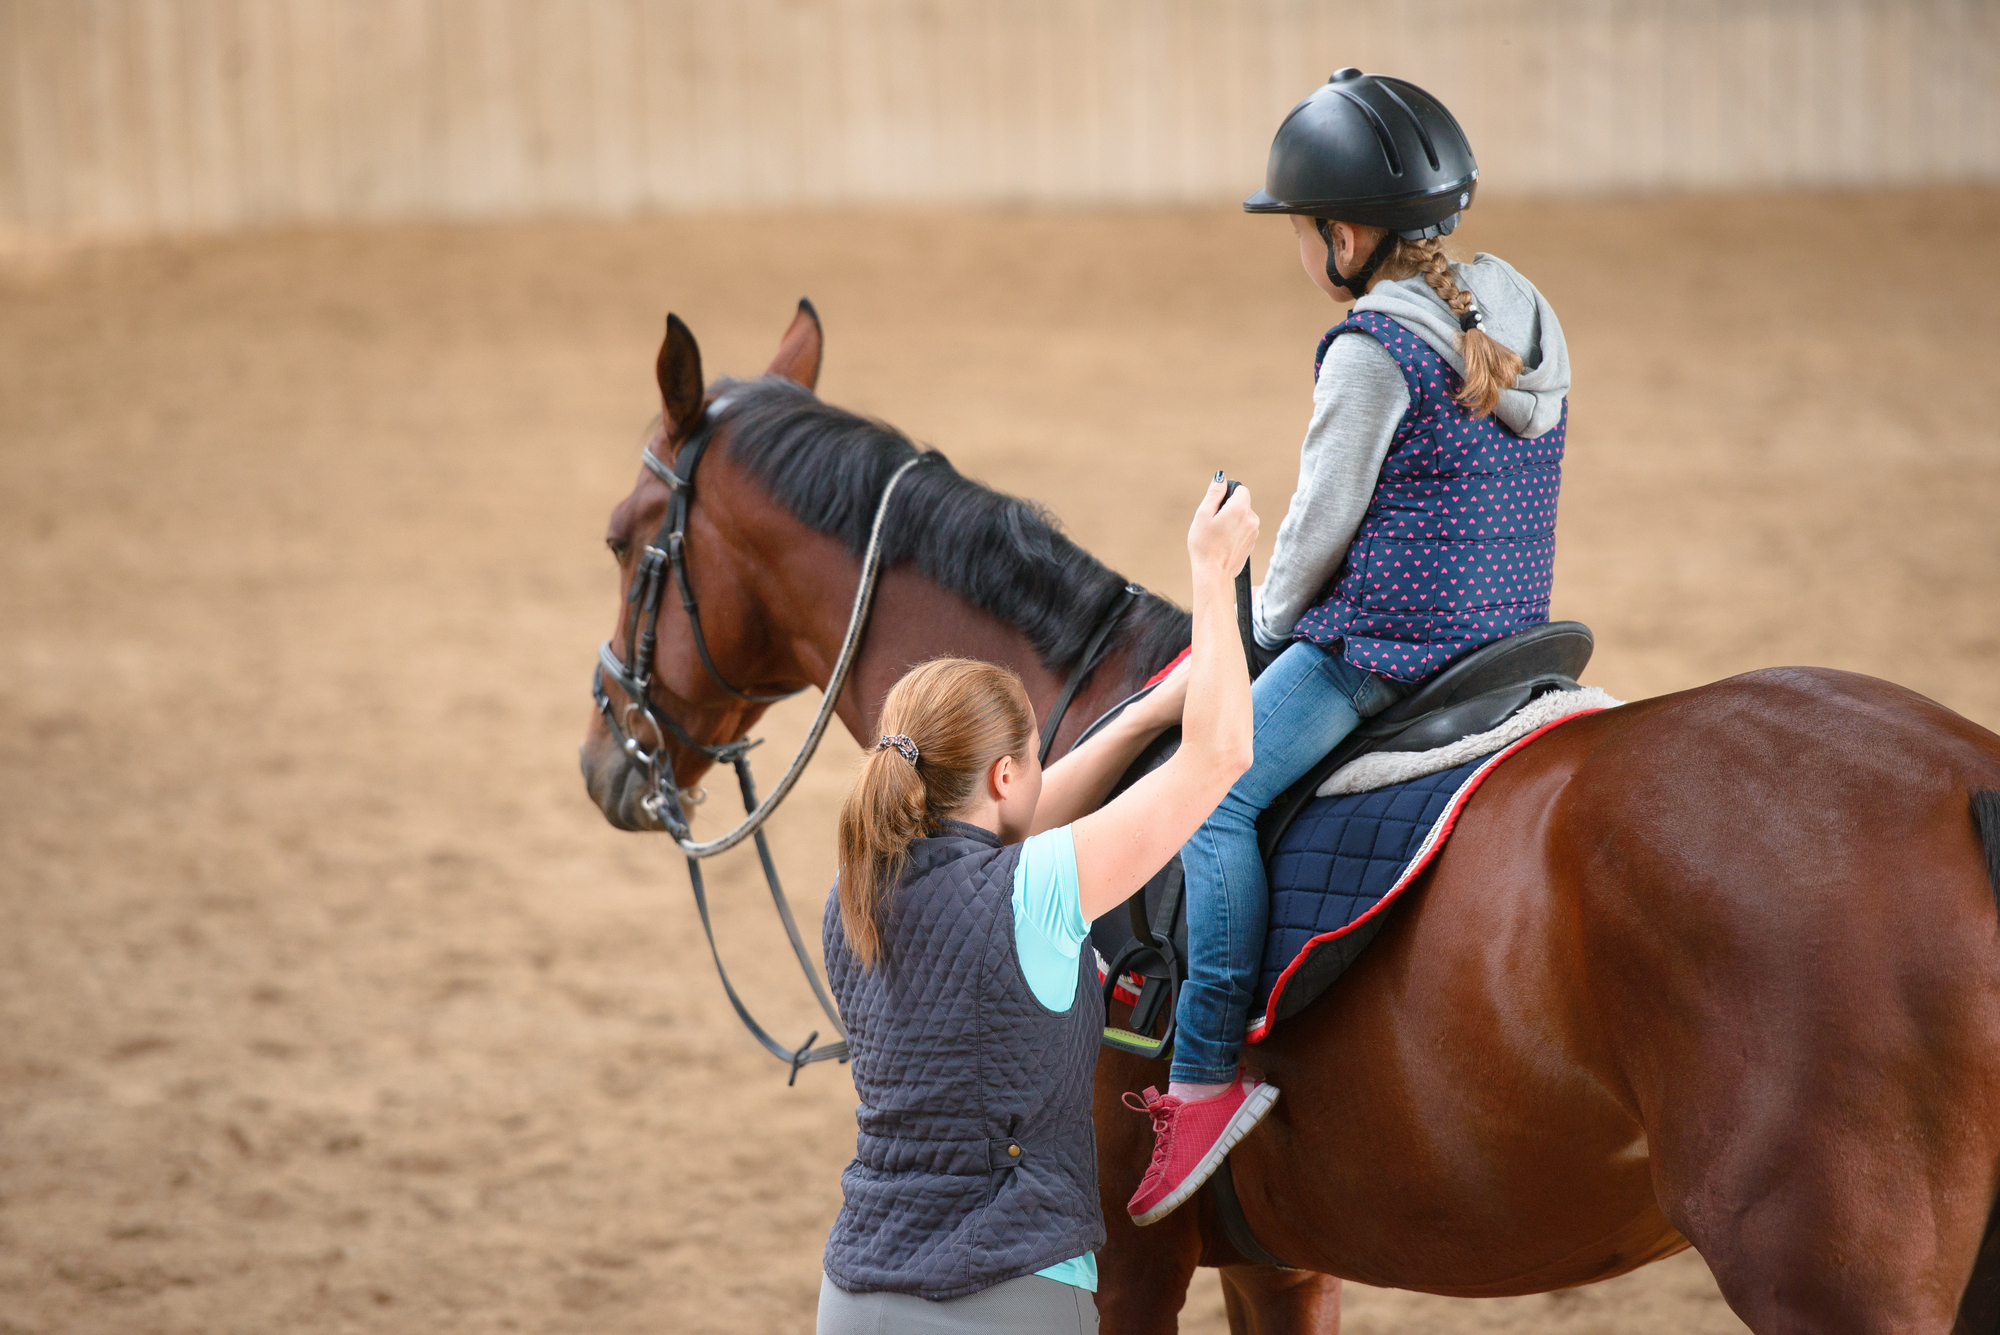 A girl on a horse having her stirrup adjusted by a woman standing on the ground.